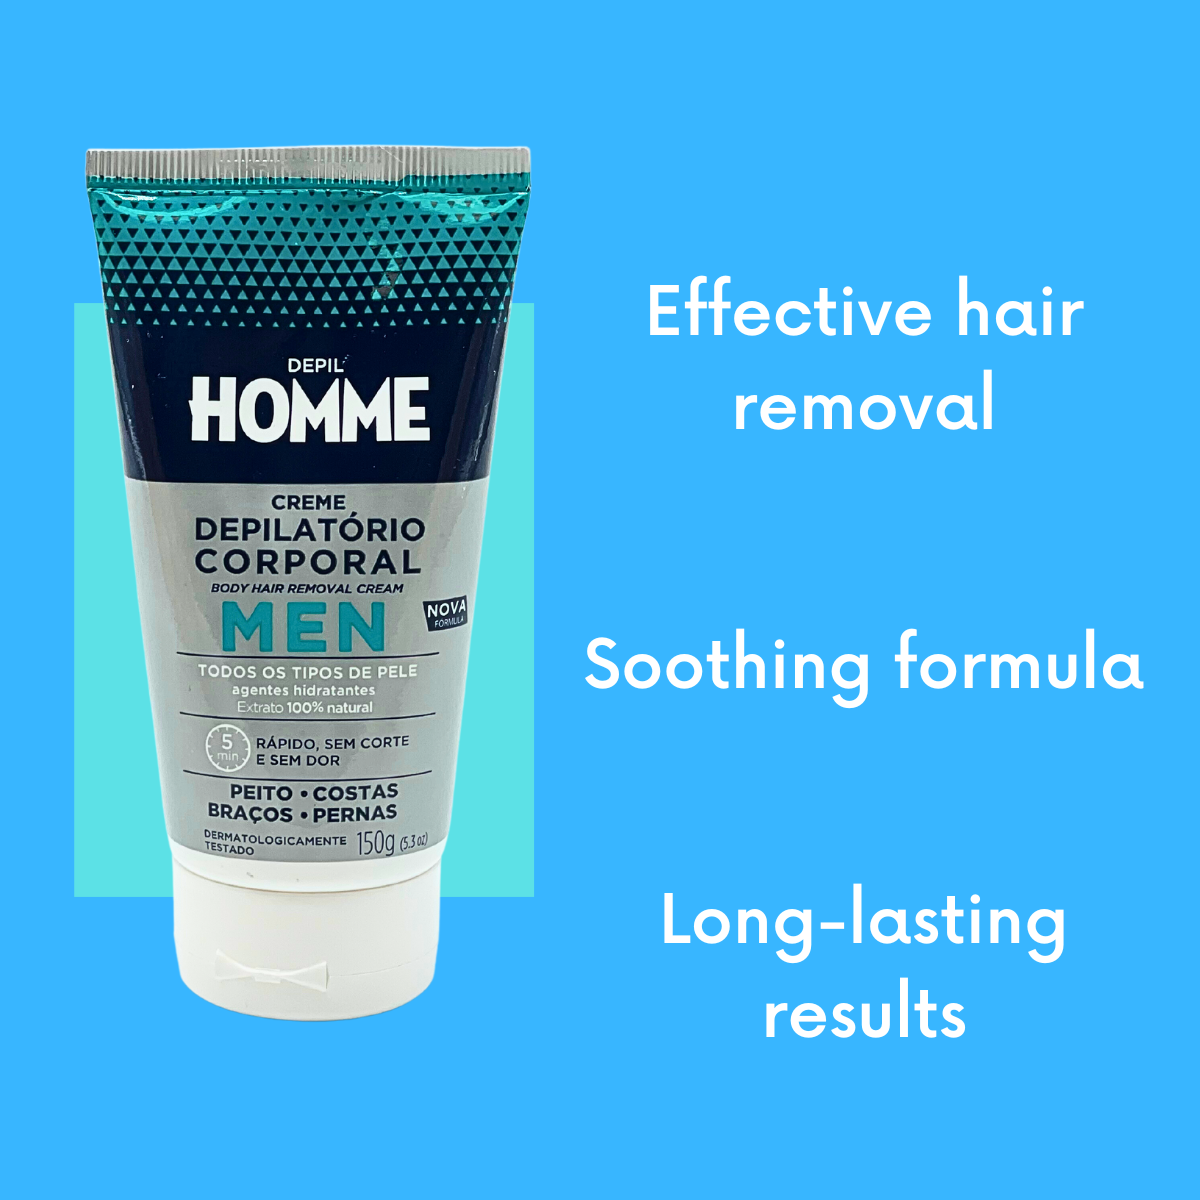 Depil HOMME Hair Removal Body Cream, Soothing Depilatory Cream, 150 g (3 Pack)